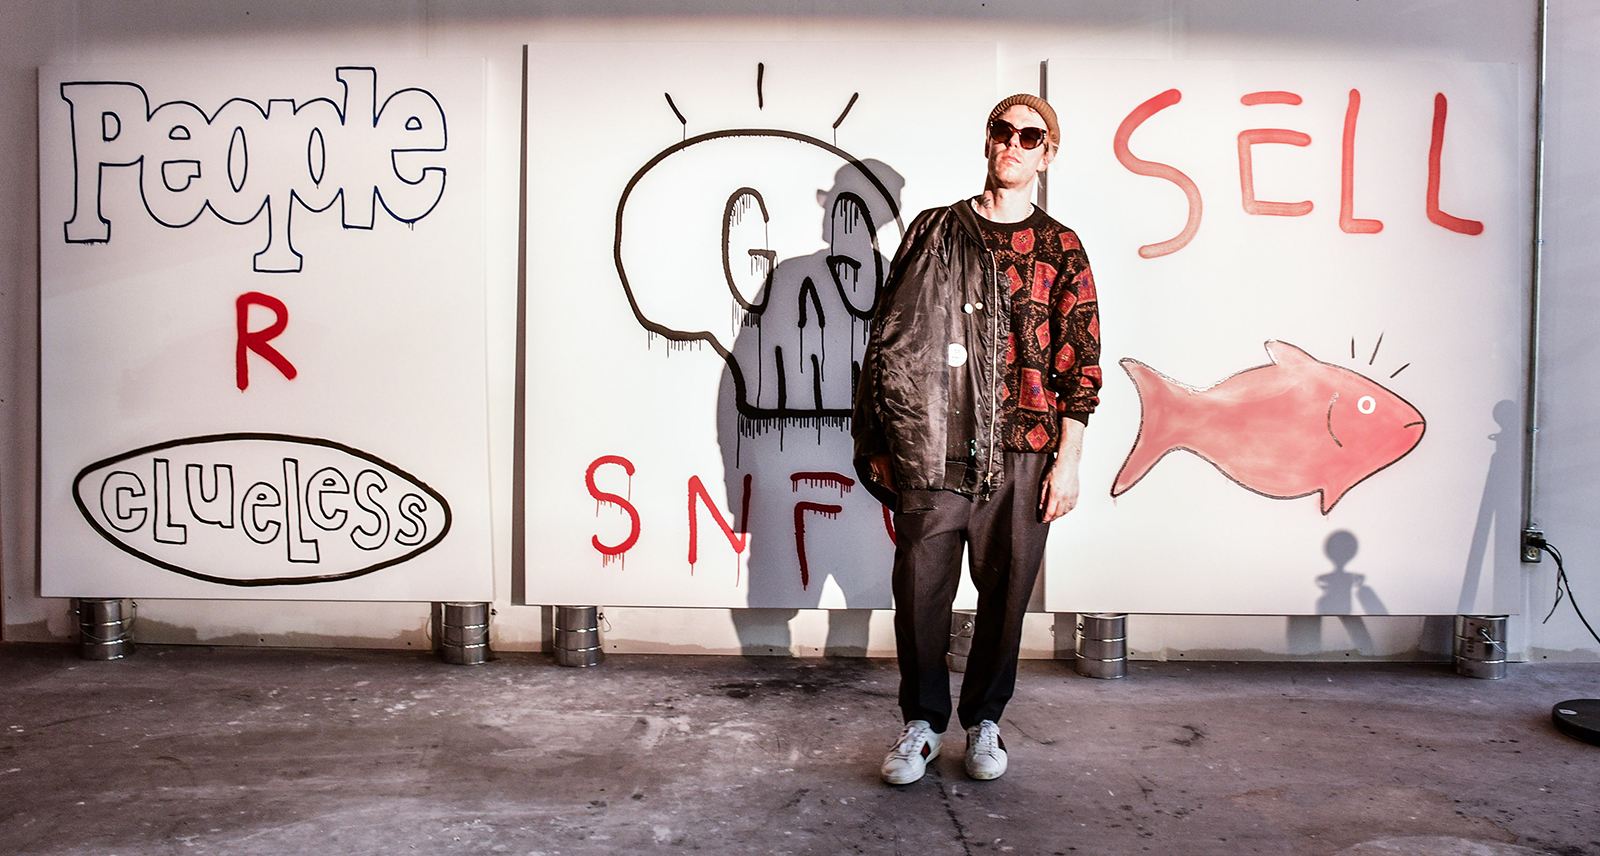 Grafitti Artist GucciGhost Talks Growing up in Canada and Collaborating With Saks